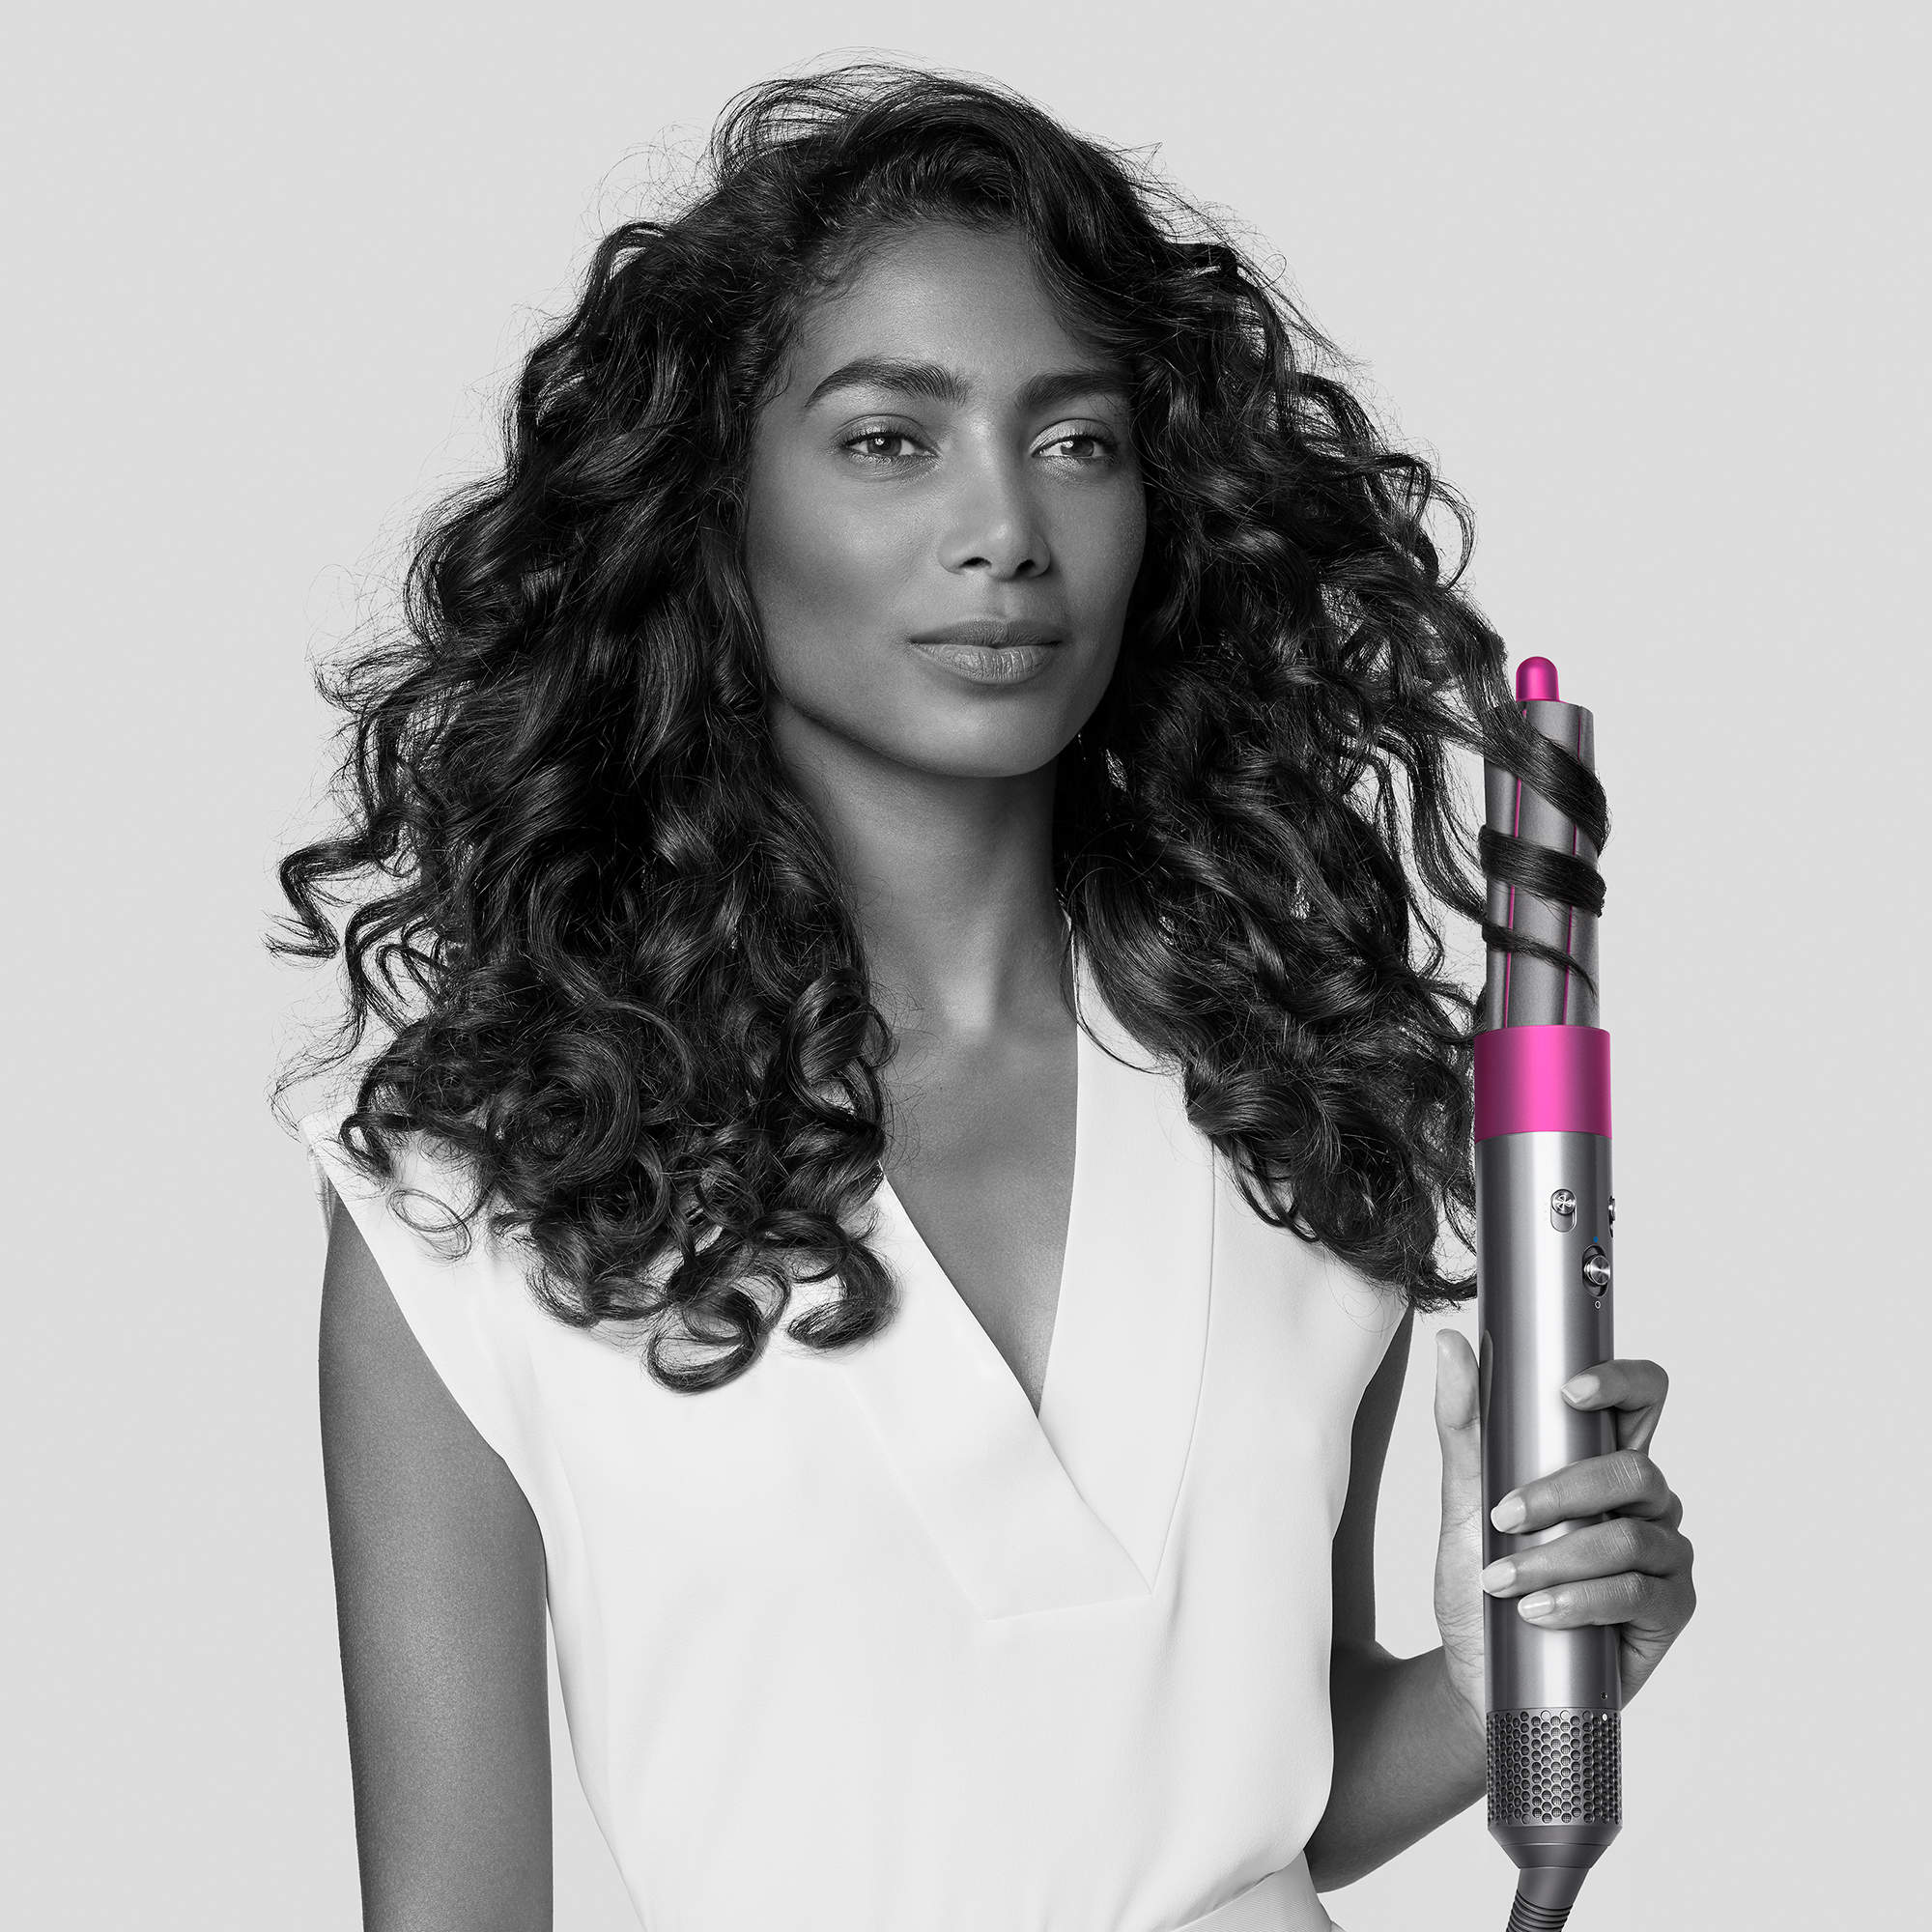 

Dyson Airwrap× Hair Styler Complete, Iron/Fuchsia (Available for UAE Customers Only, Pink